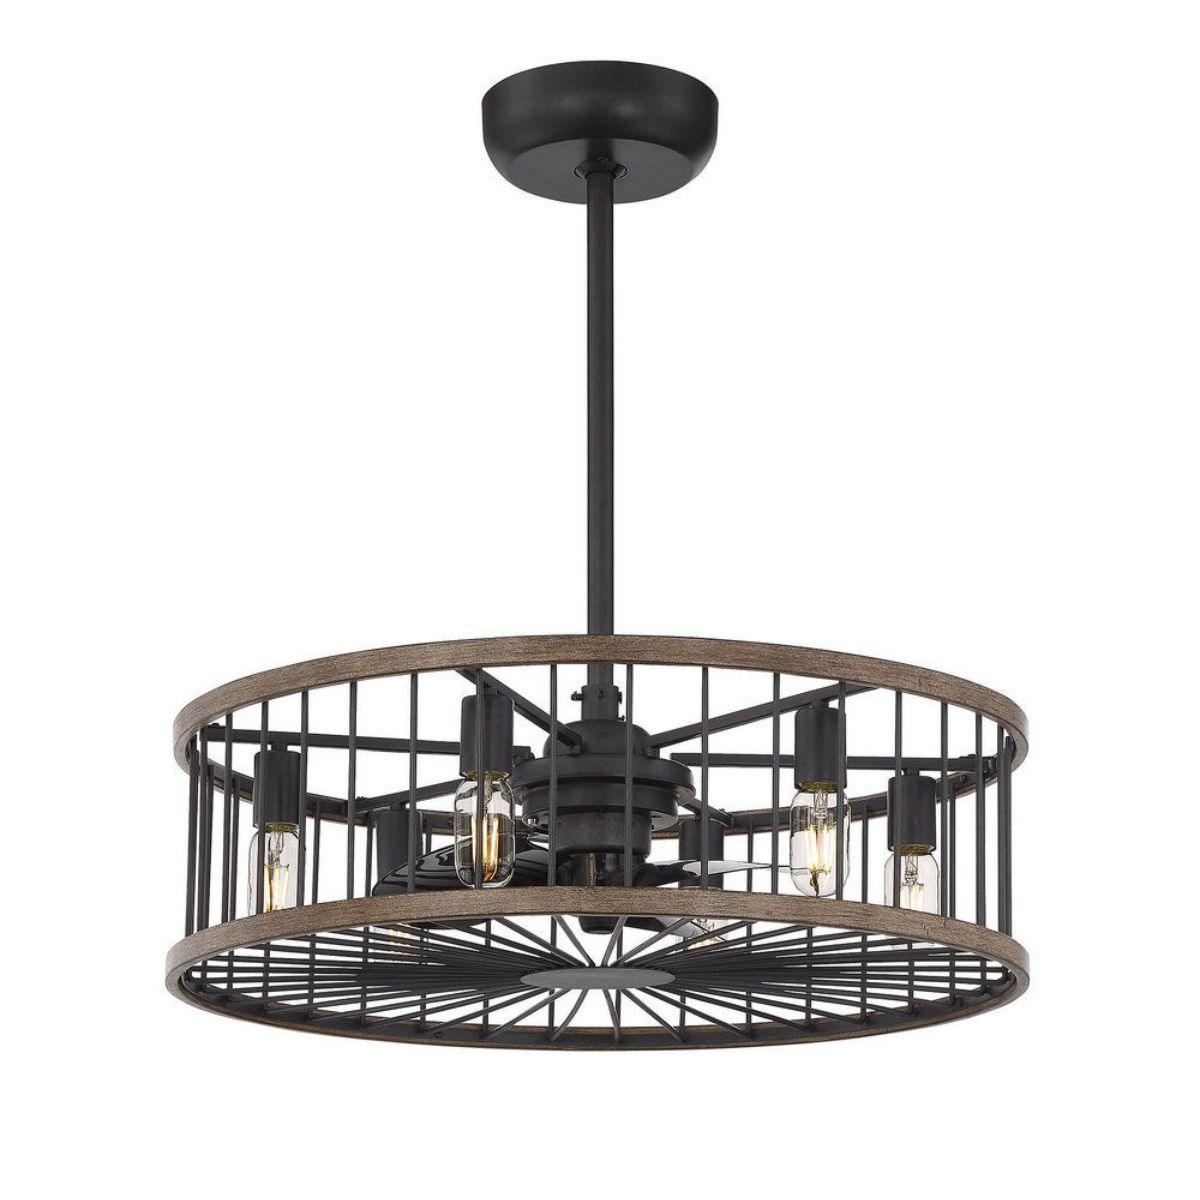 Kona 26 Inch Chandelier Outdoor Ceiling Fan With Light And Remote, Sapele Finish - Bees Lighting